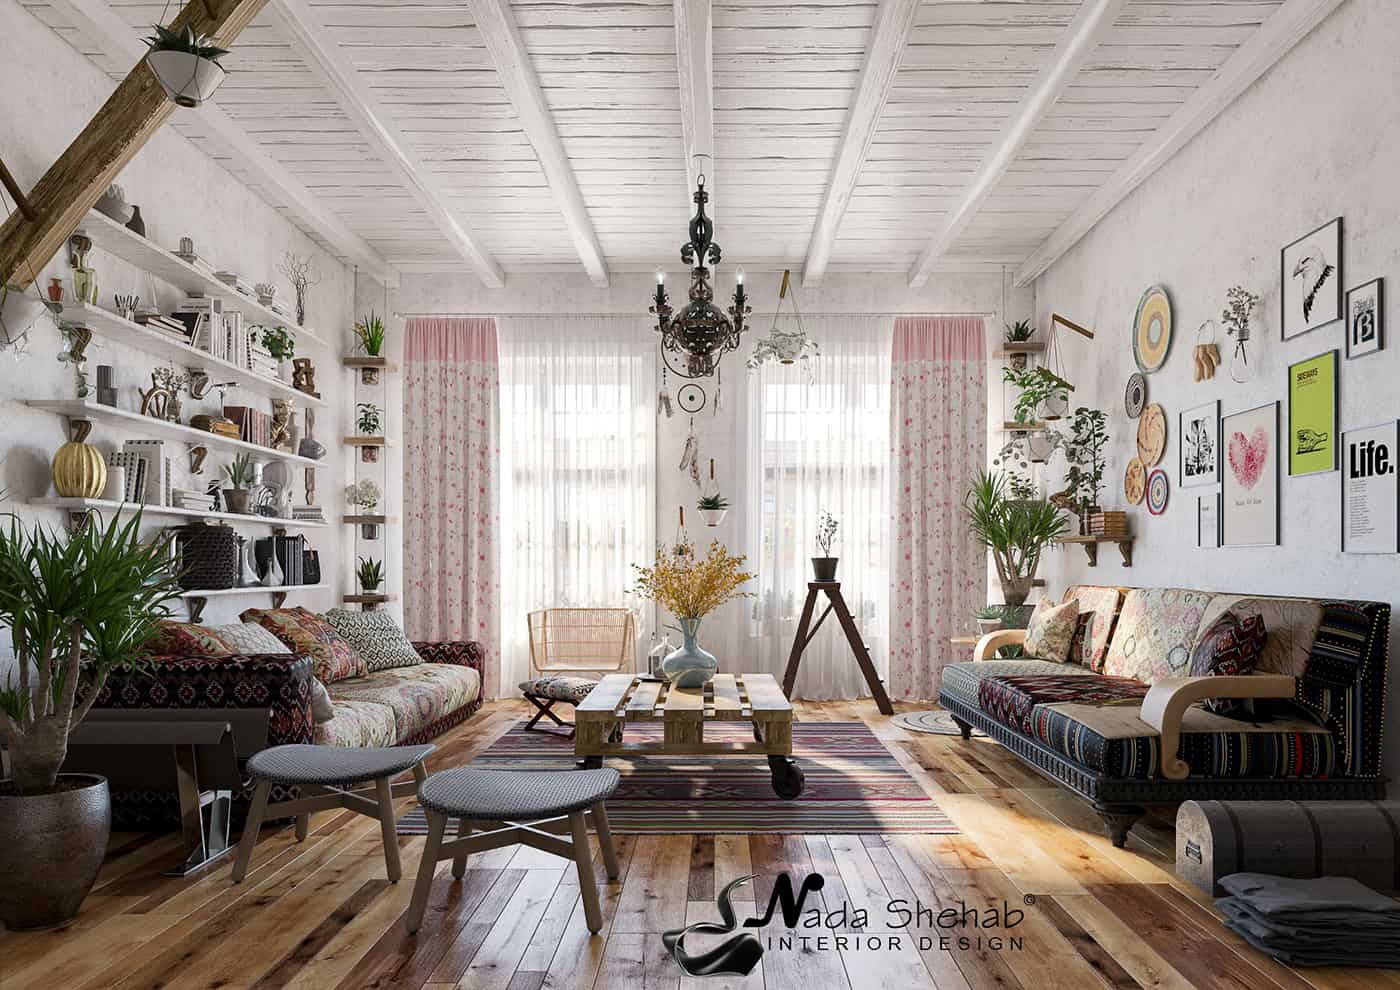 What Is Bohemian Design Style?